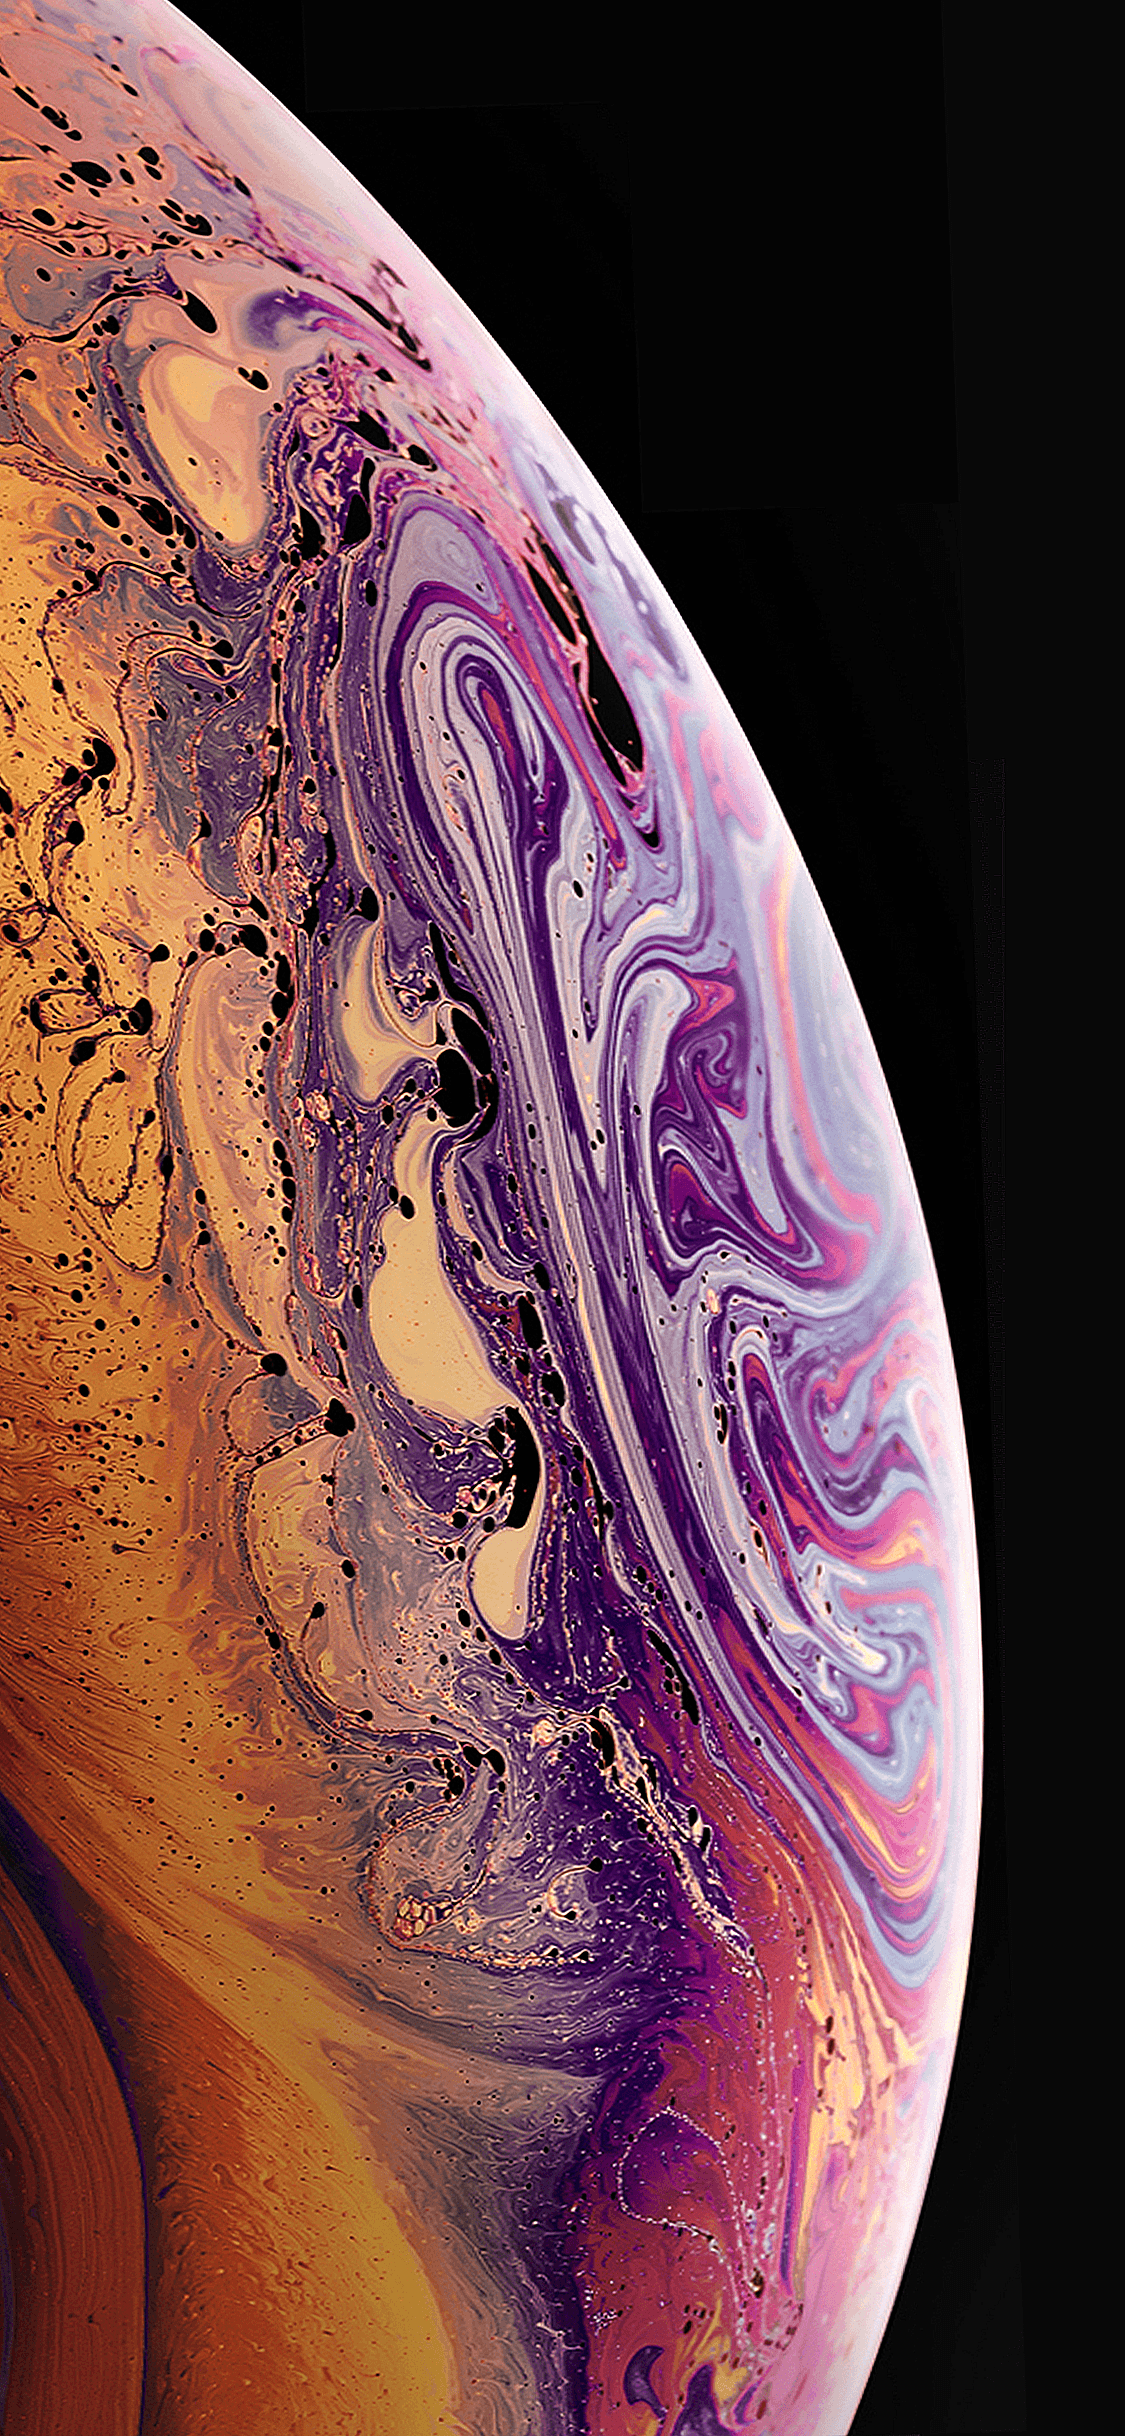 Download iPhone XS and iPhone XR Stock Wallpaper 28 Walls